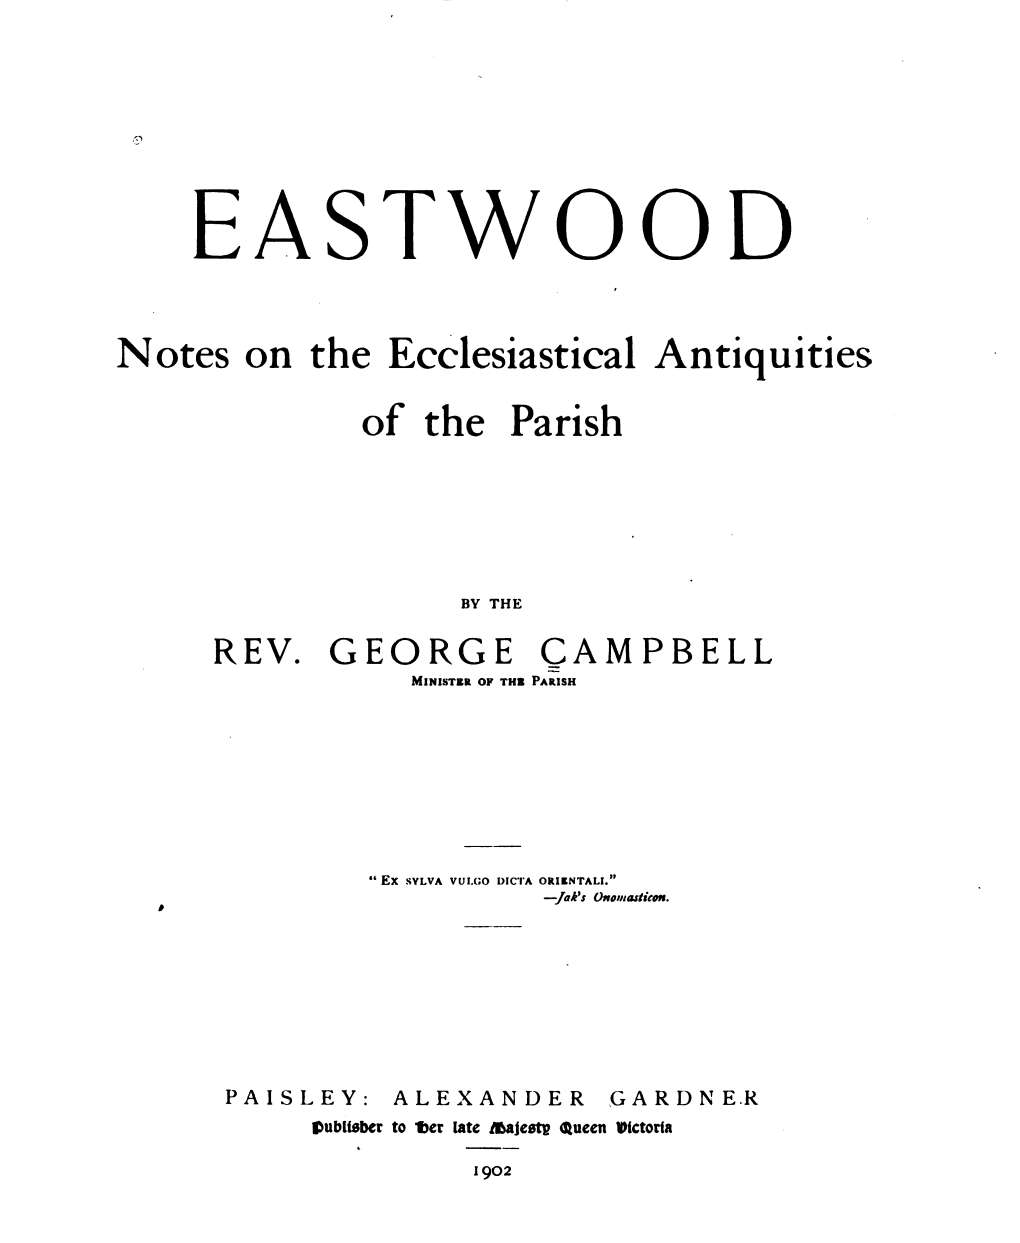 EASTWOOD Notes on the Ecclesiastical